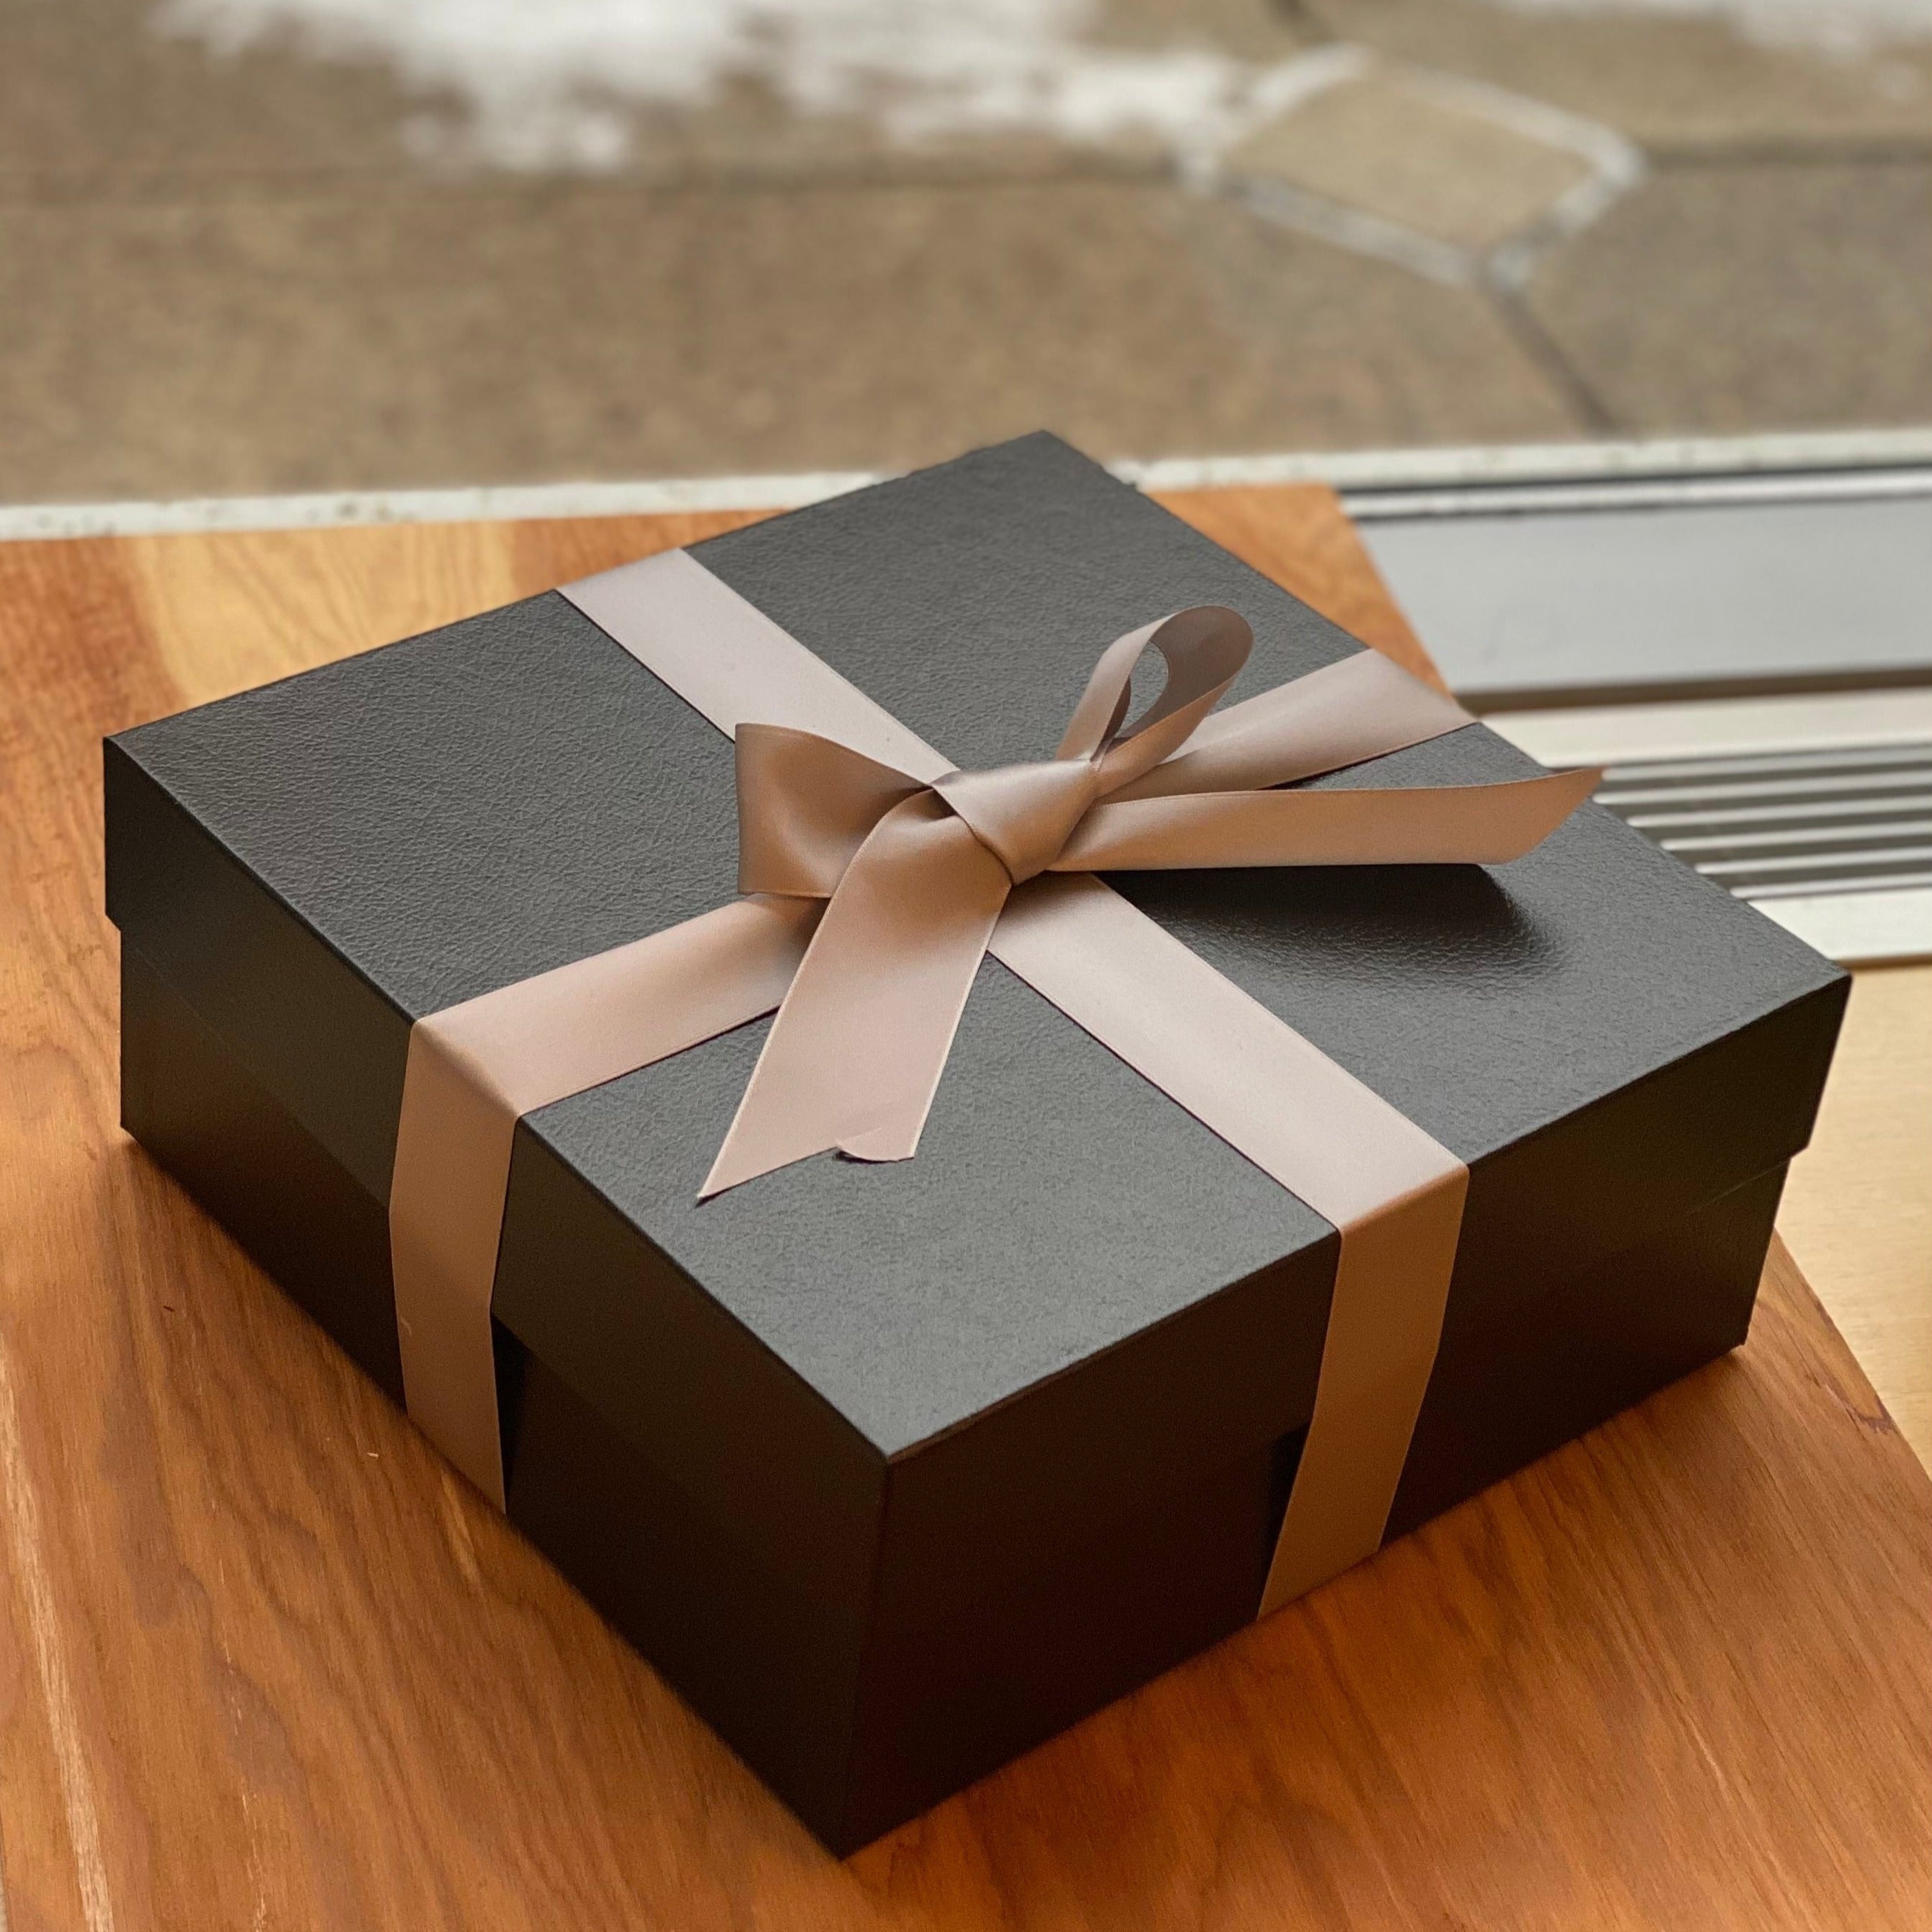 How we Curated our New 2021 Curated Gift Box Designs